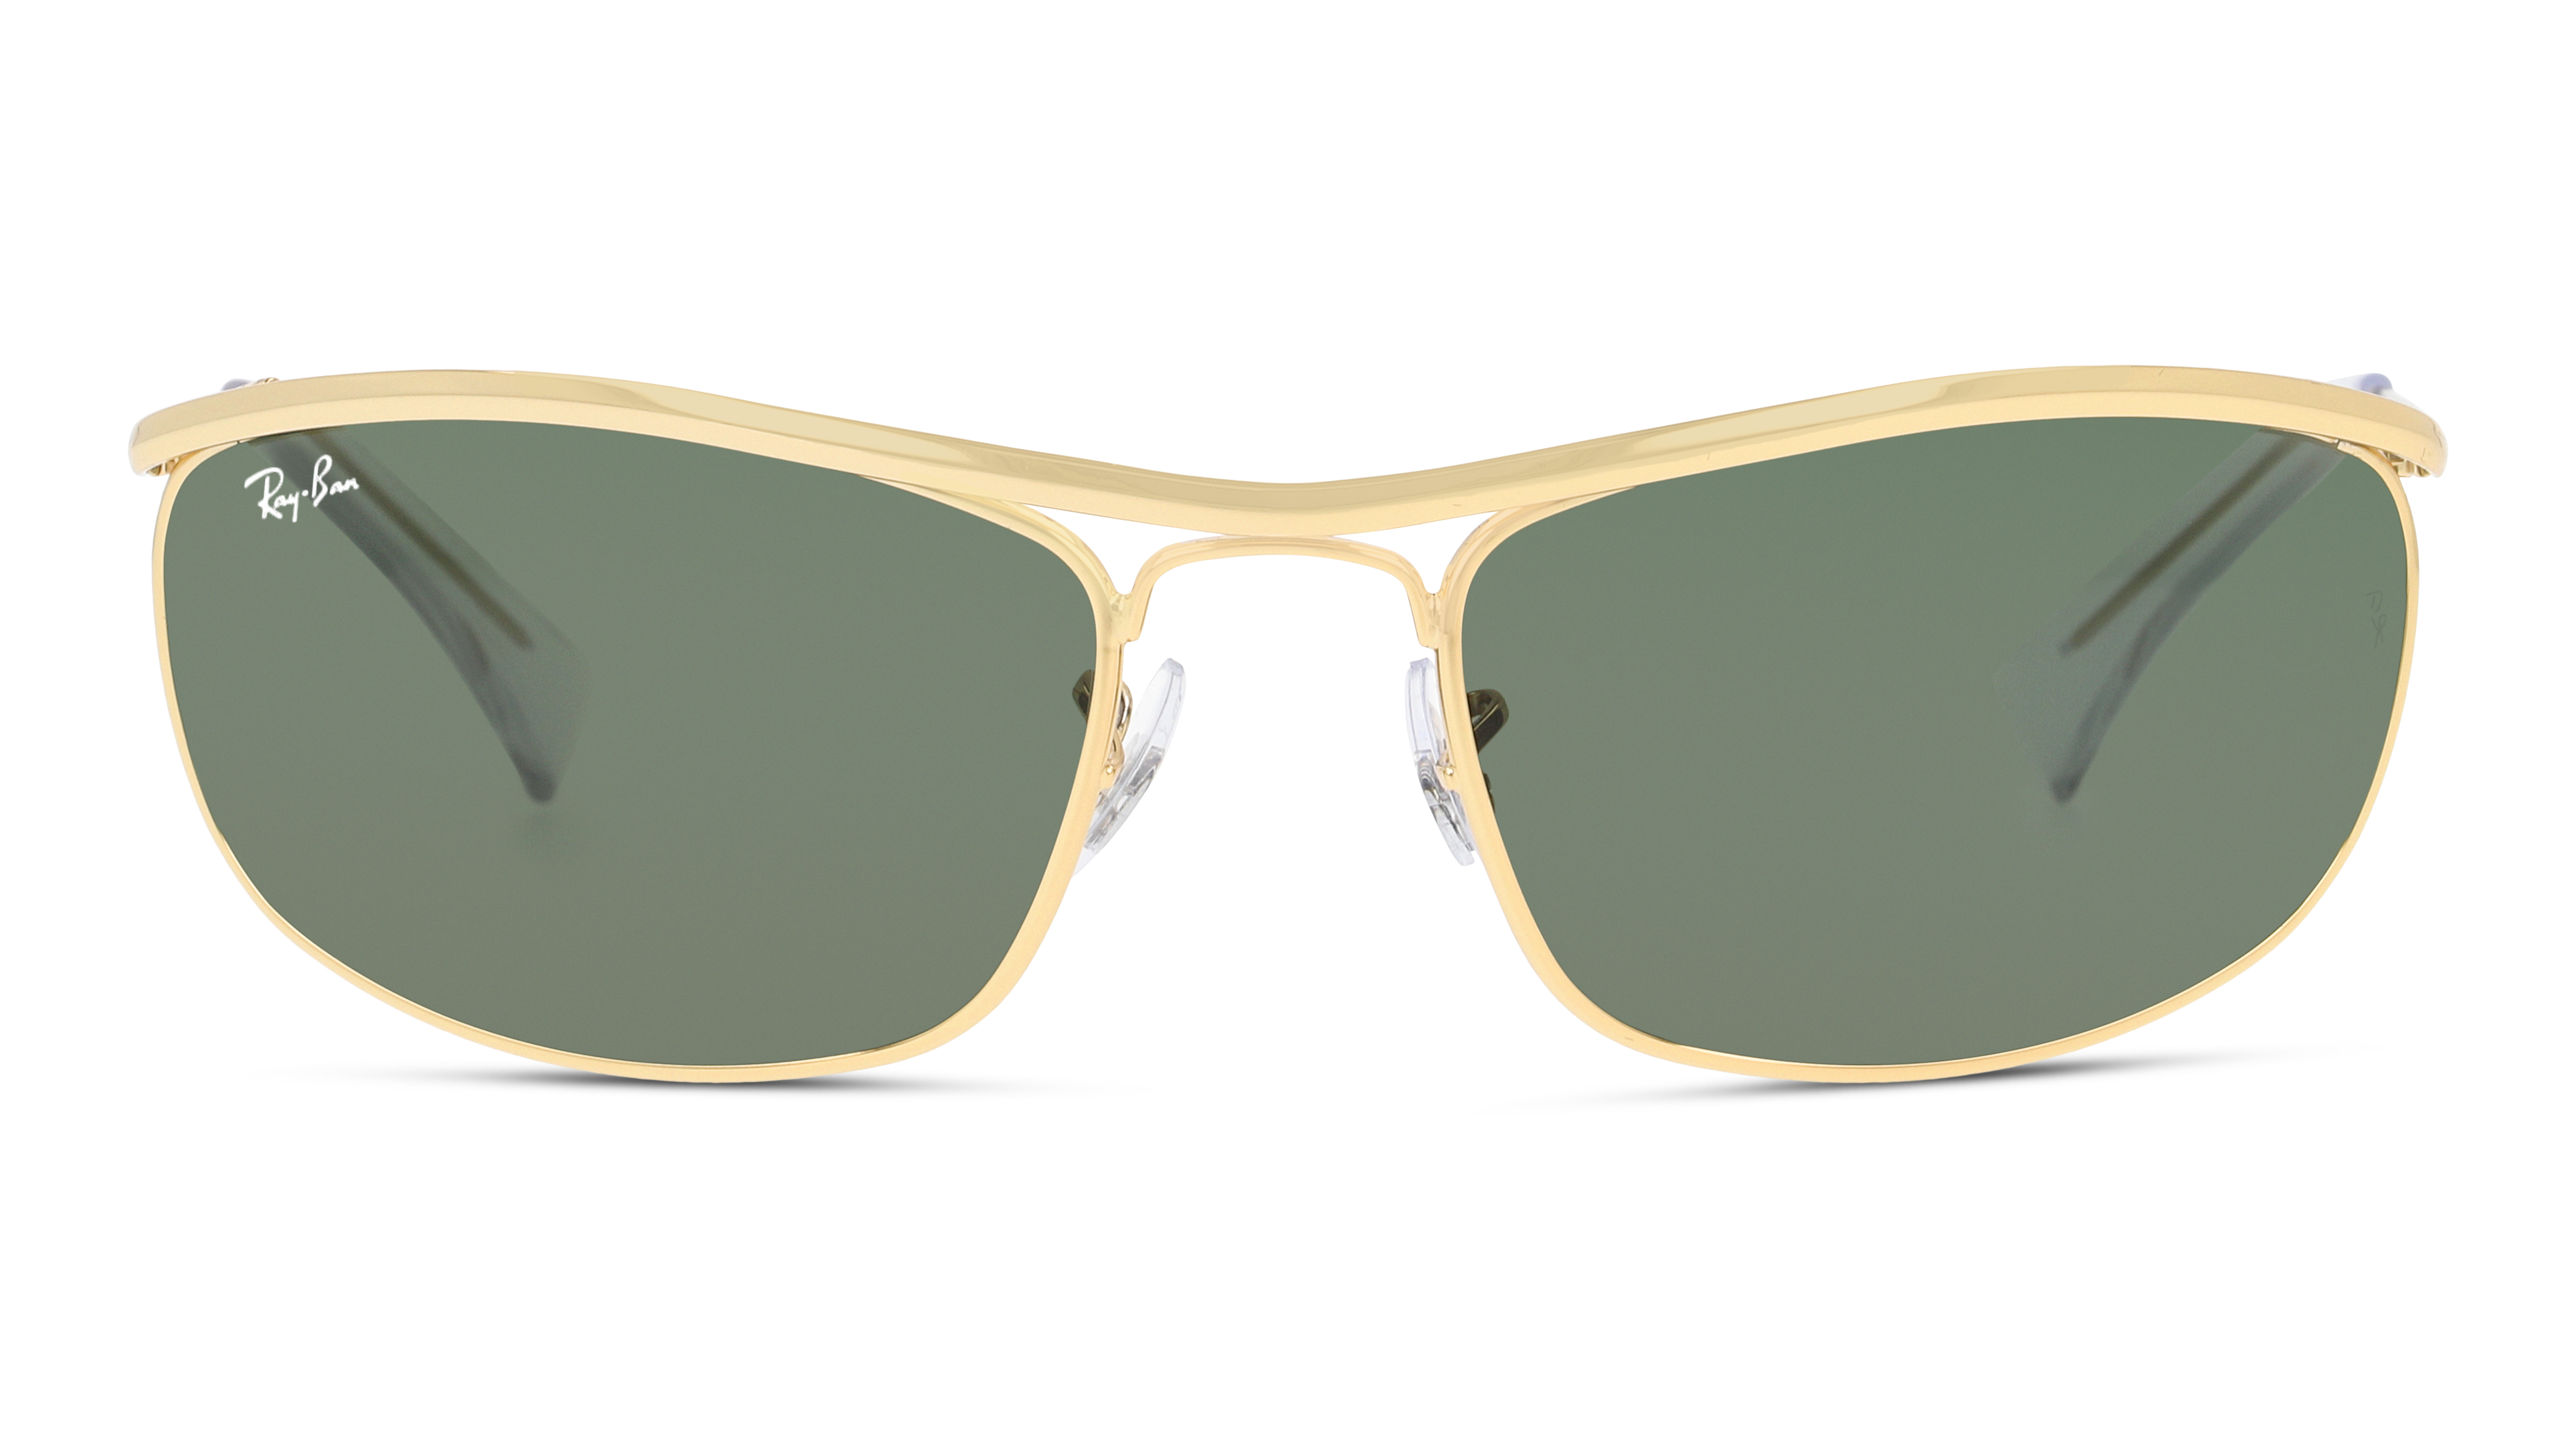 [products.image.front] Ray-Ban Olympian RB3119 001